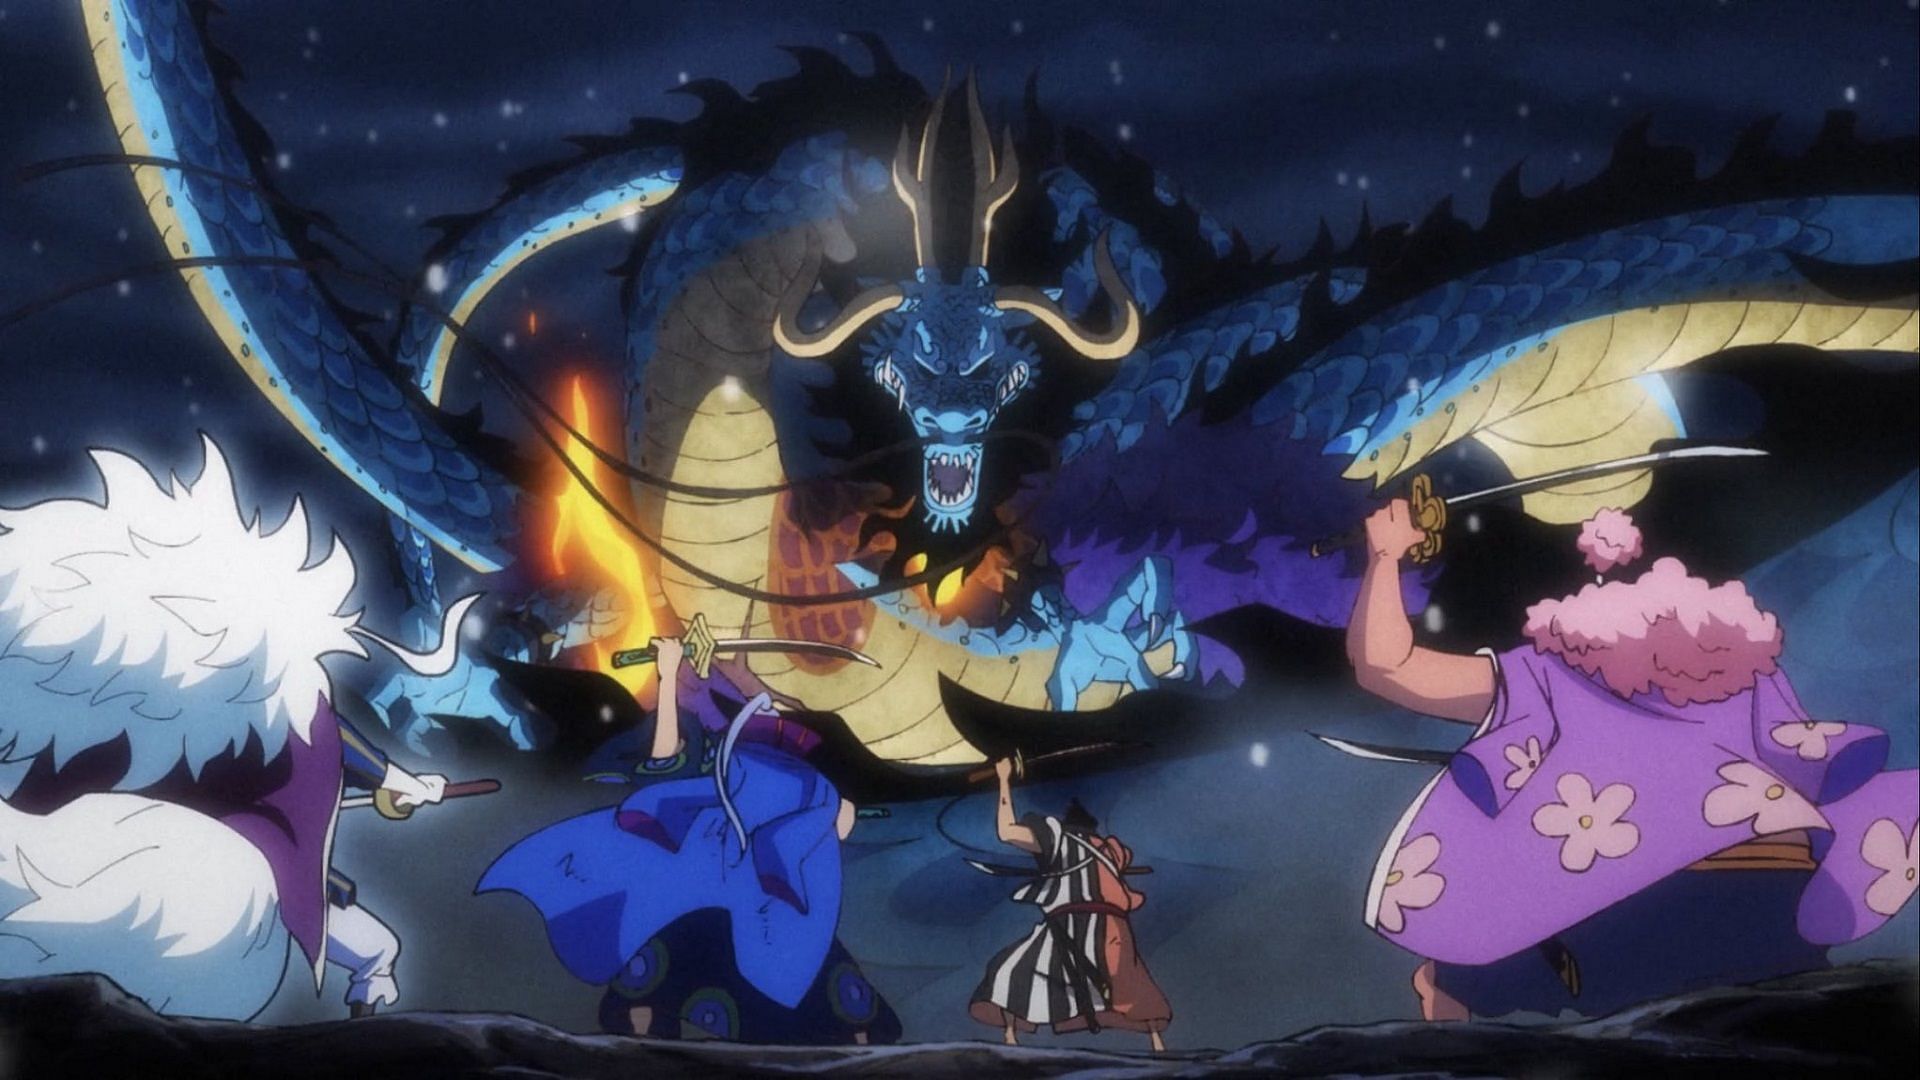 The Scabbards vs Kaido as seen in One Piece (Image via Toei Animation, One Piece)